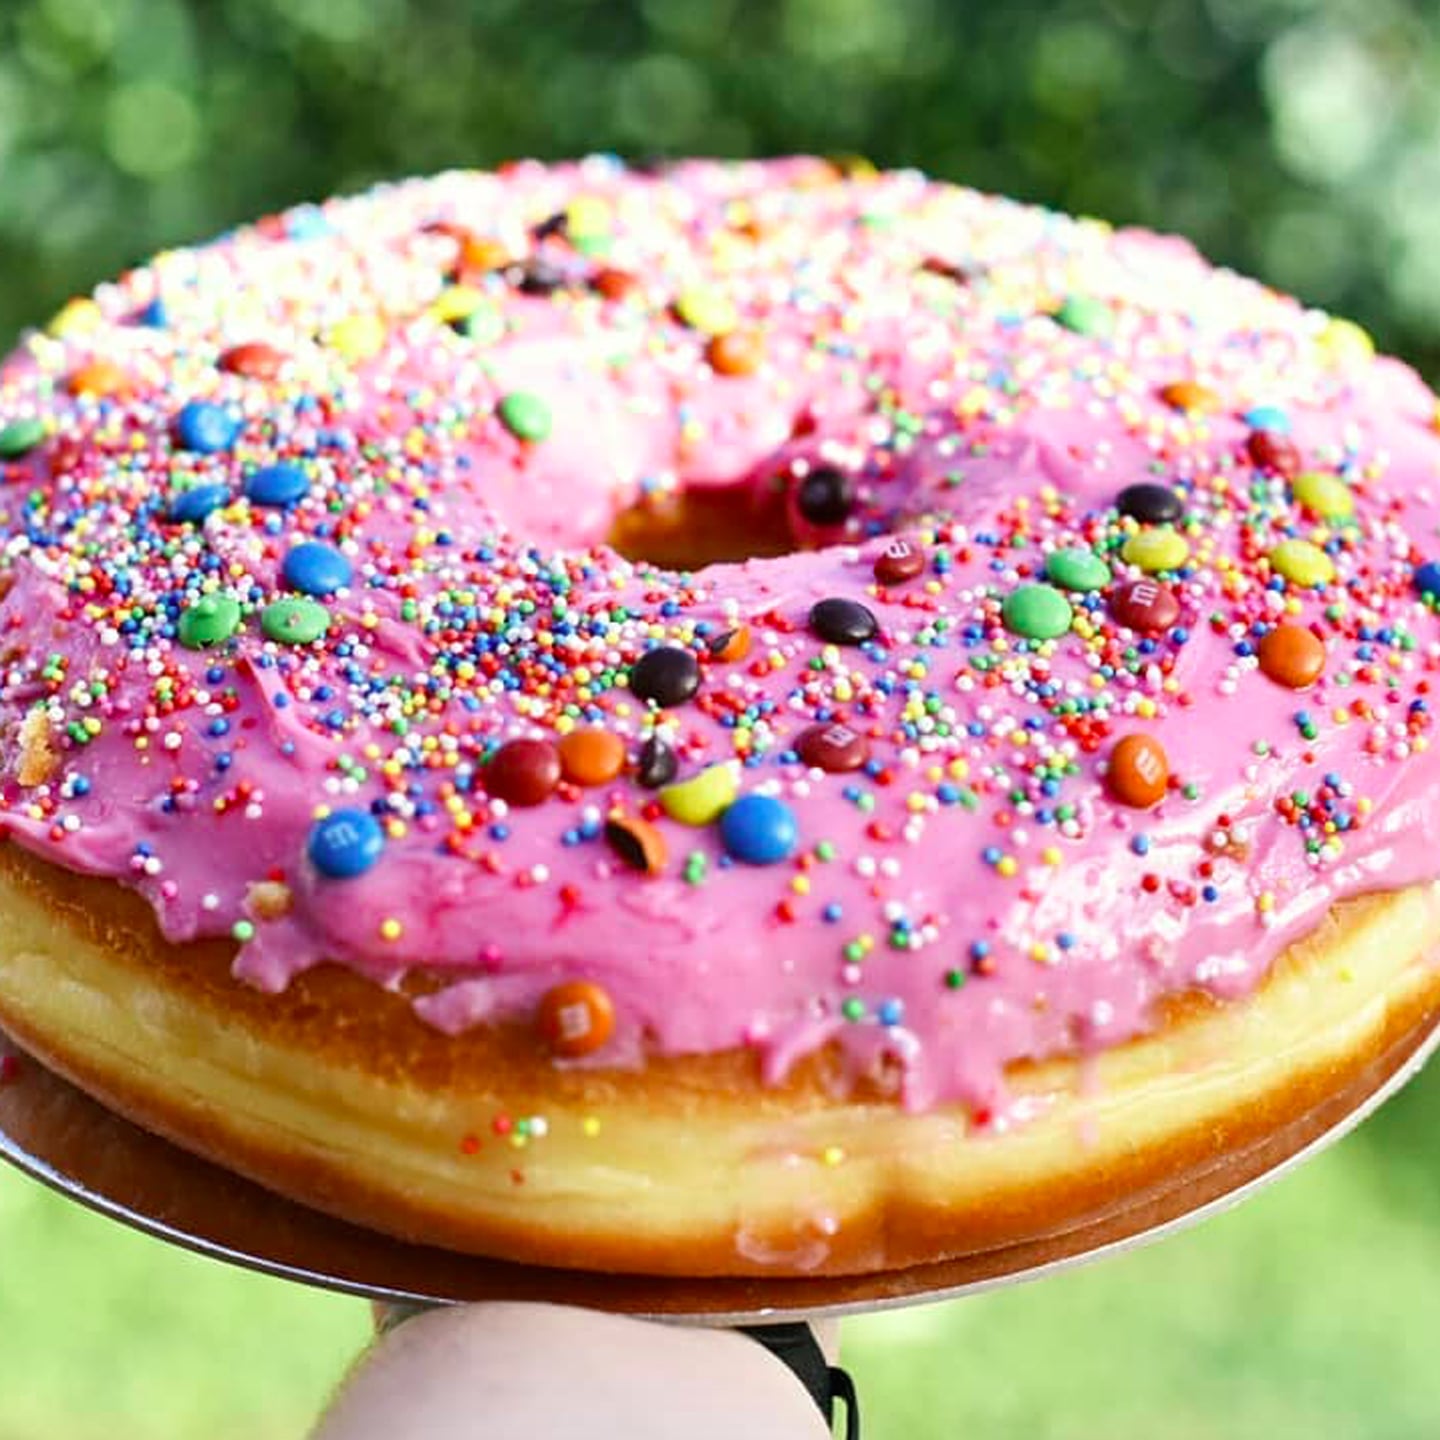 Costco Giant Pink Icing Doughnut With M&M's | POPSUGAR Food